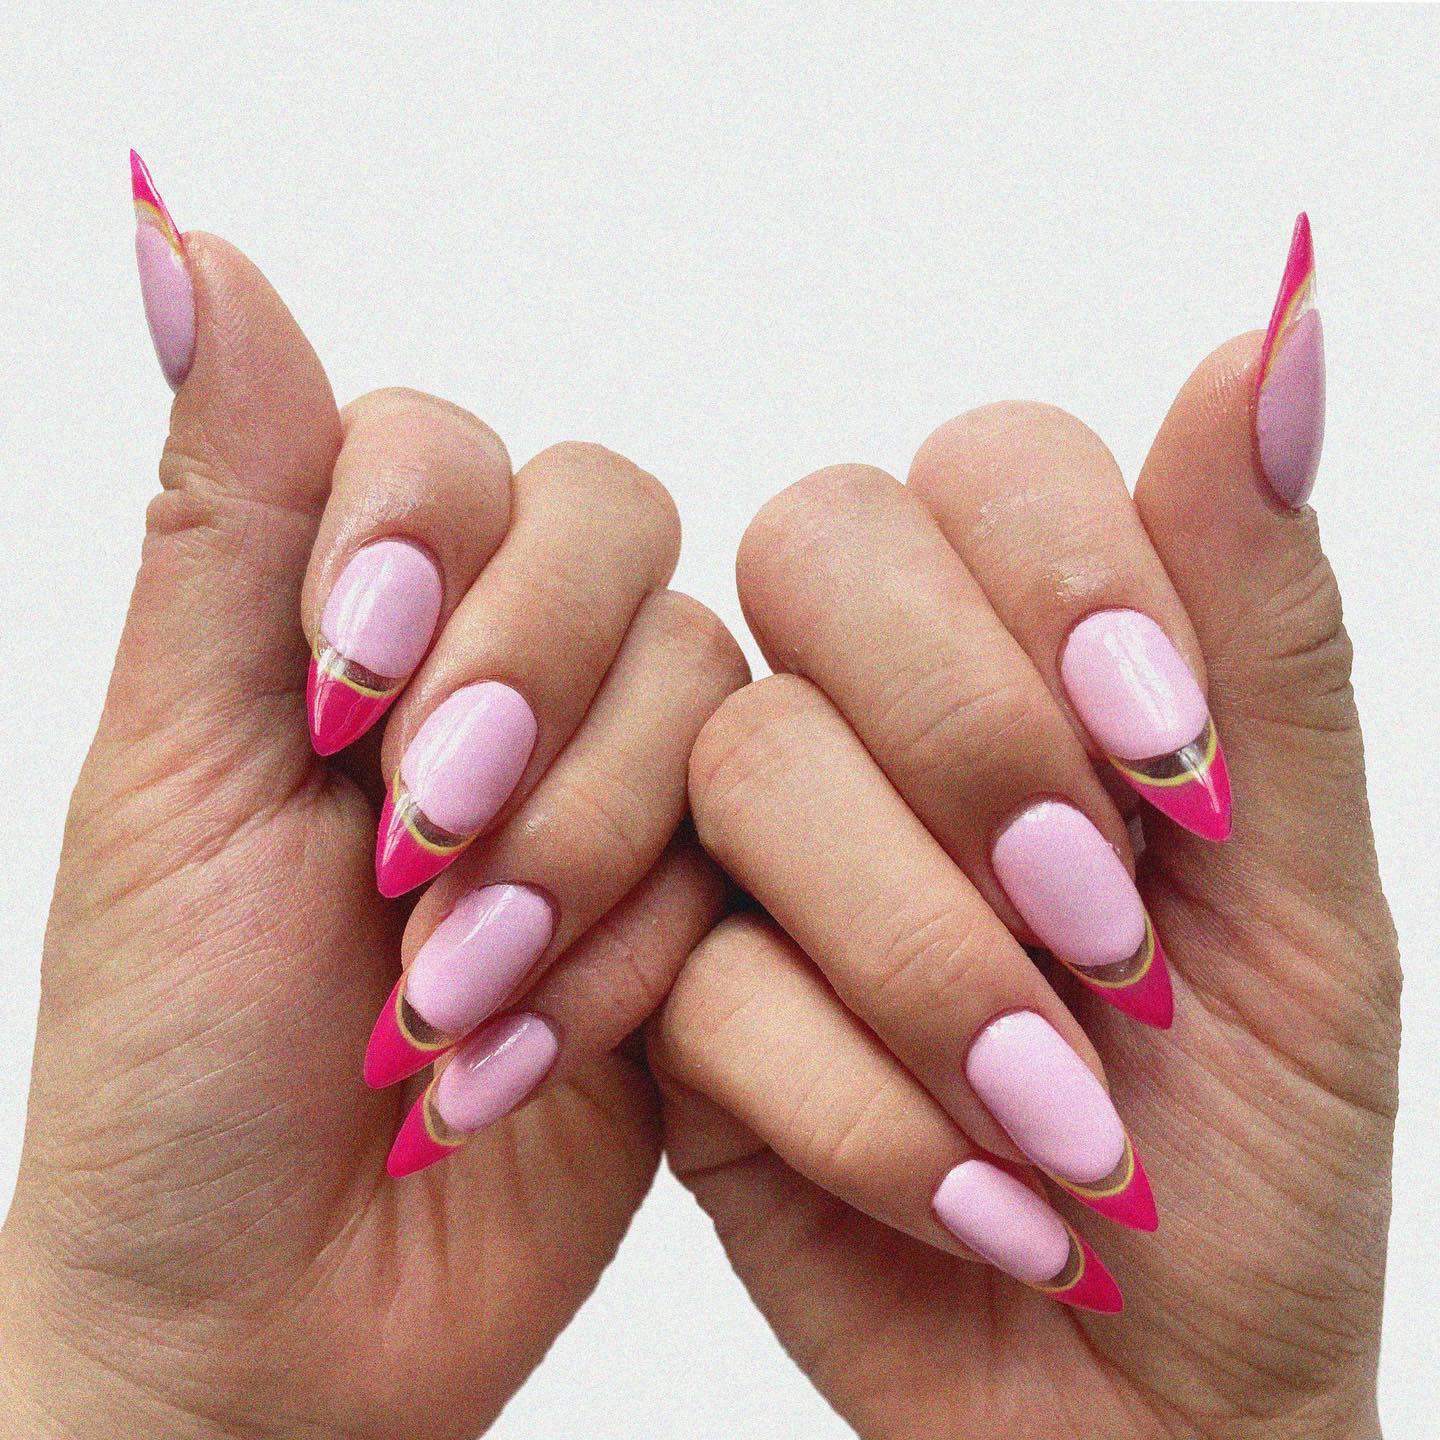 Lilac stiletto nails and pink French tips with a transparent line between these two are just fabulous. It's not a classic look, so it's a nice one to try to get out of your comfort zone.